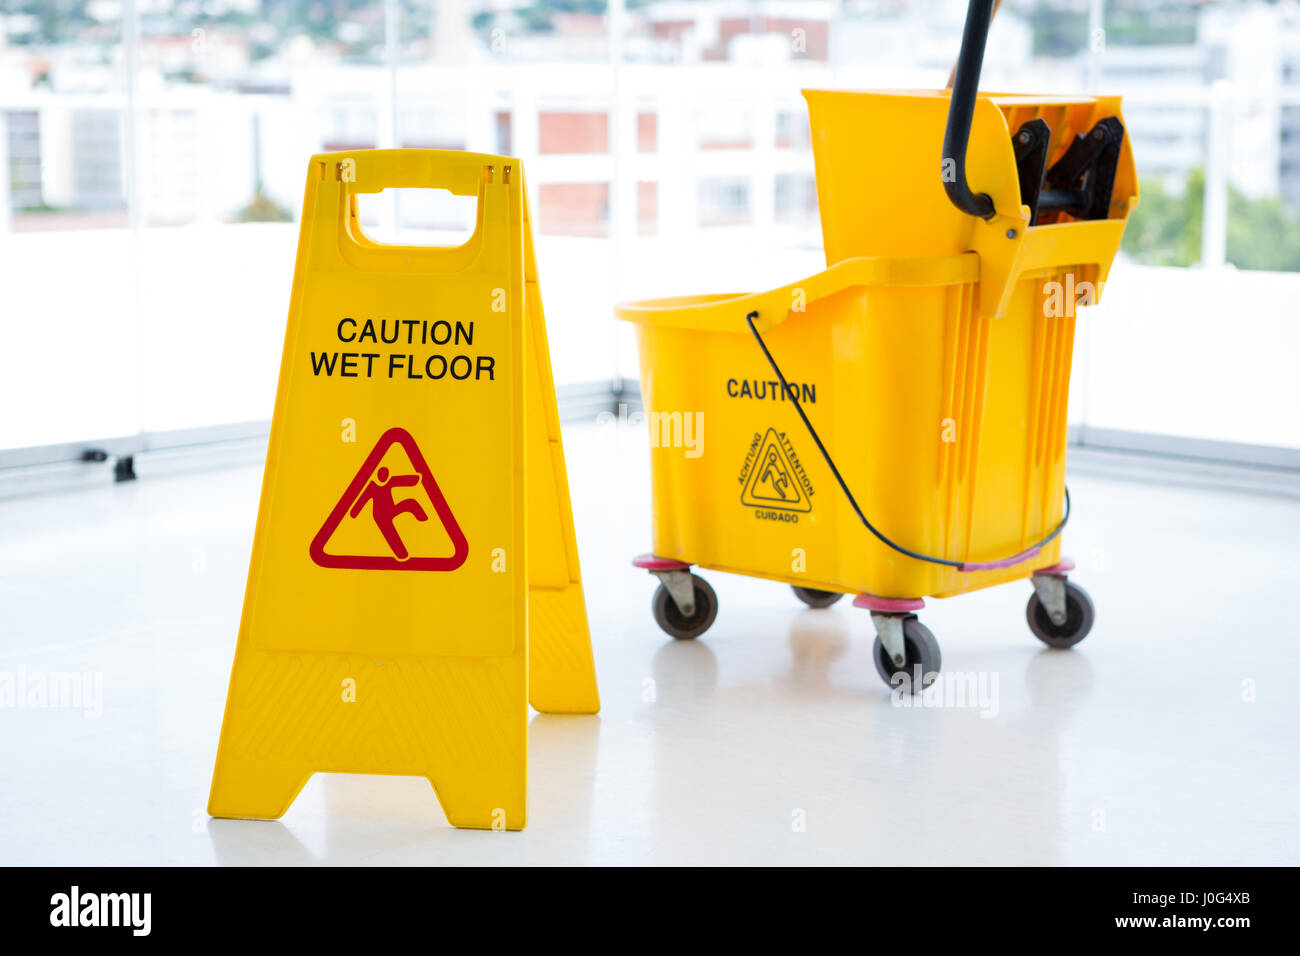 Sigh board with mop bucket in room against glass Stock Photo